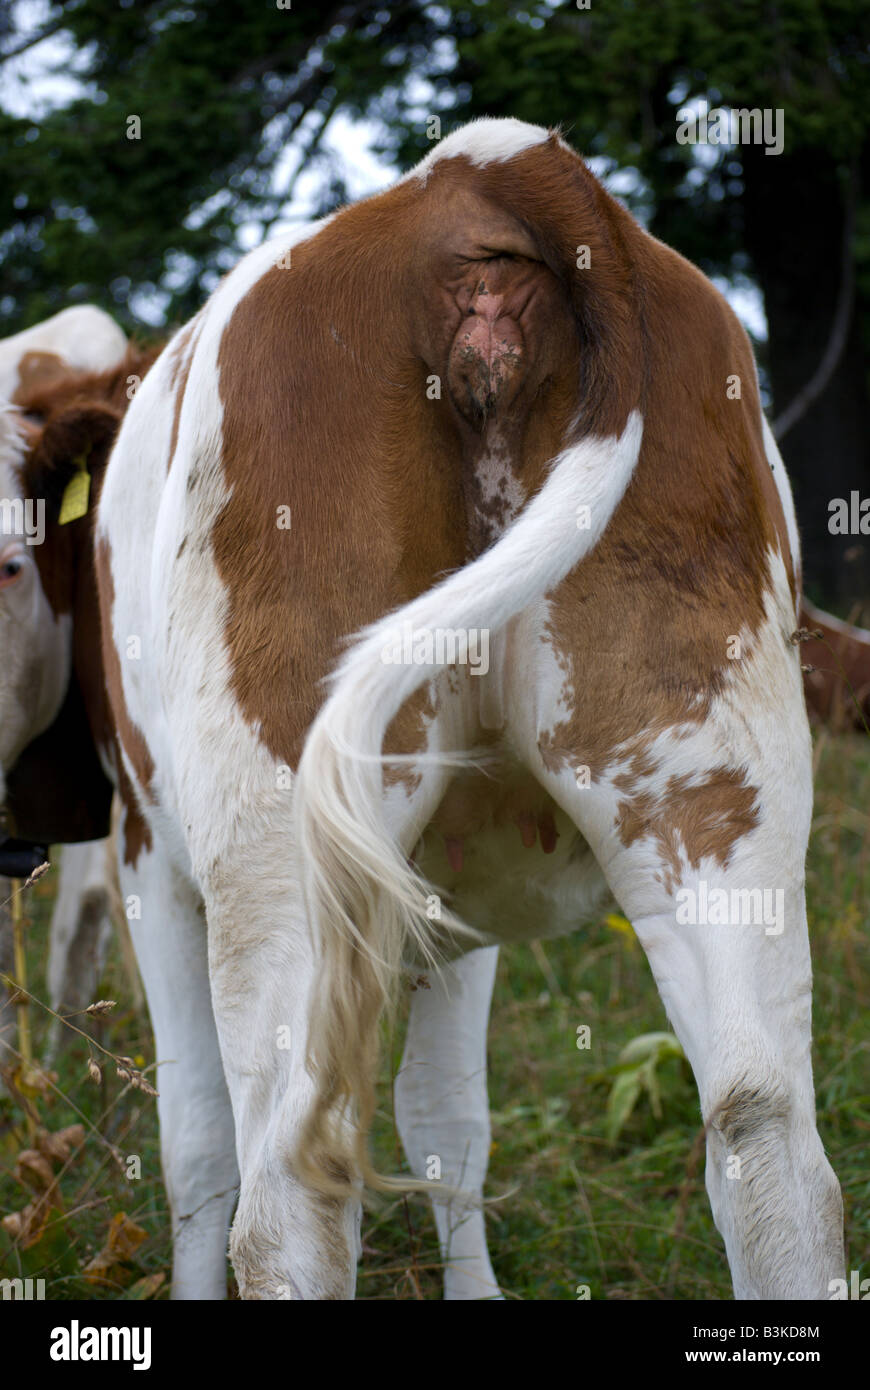 Rear end of a dairy cow Stock Photo